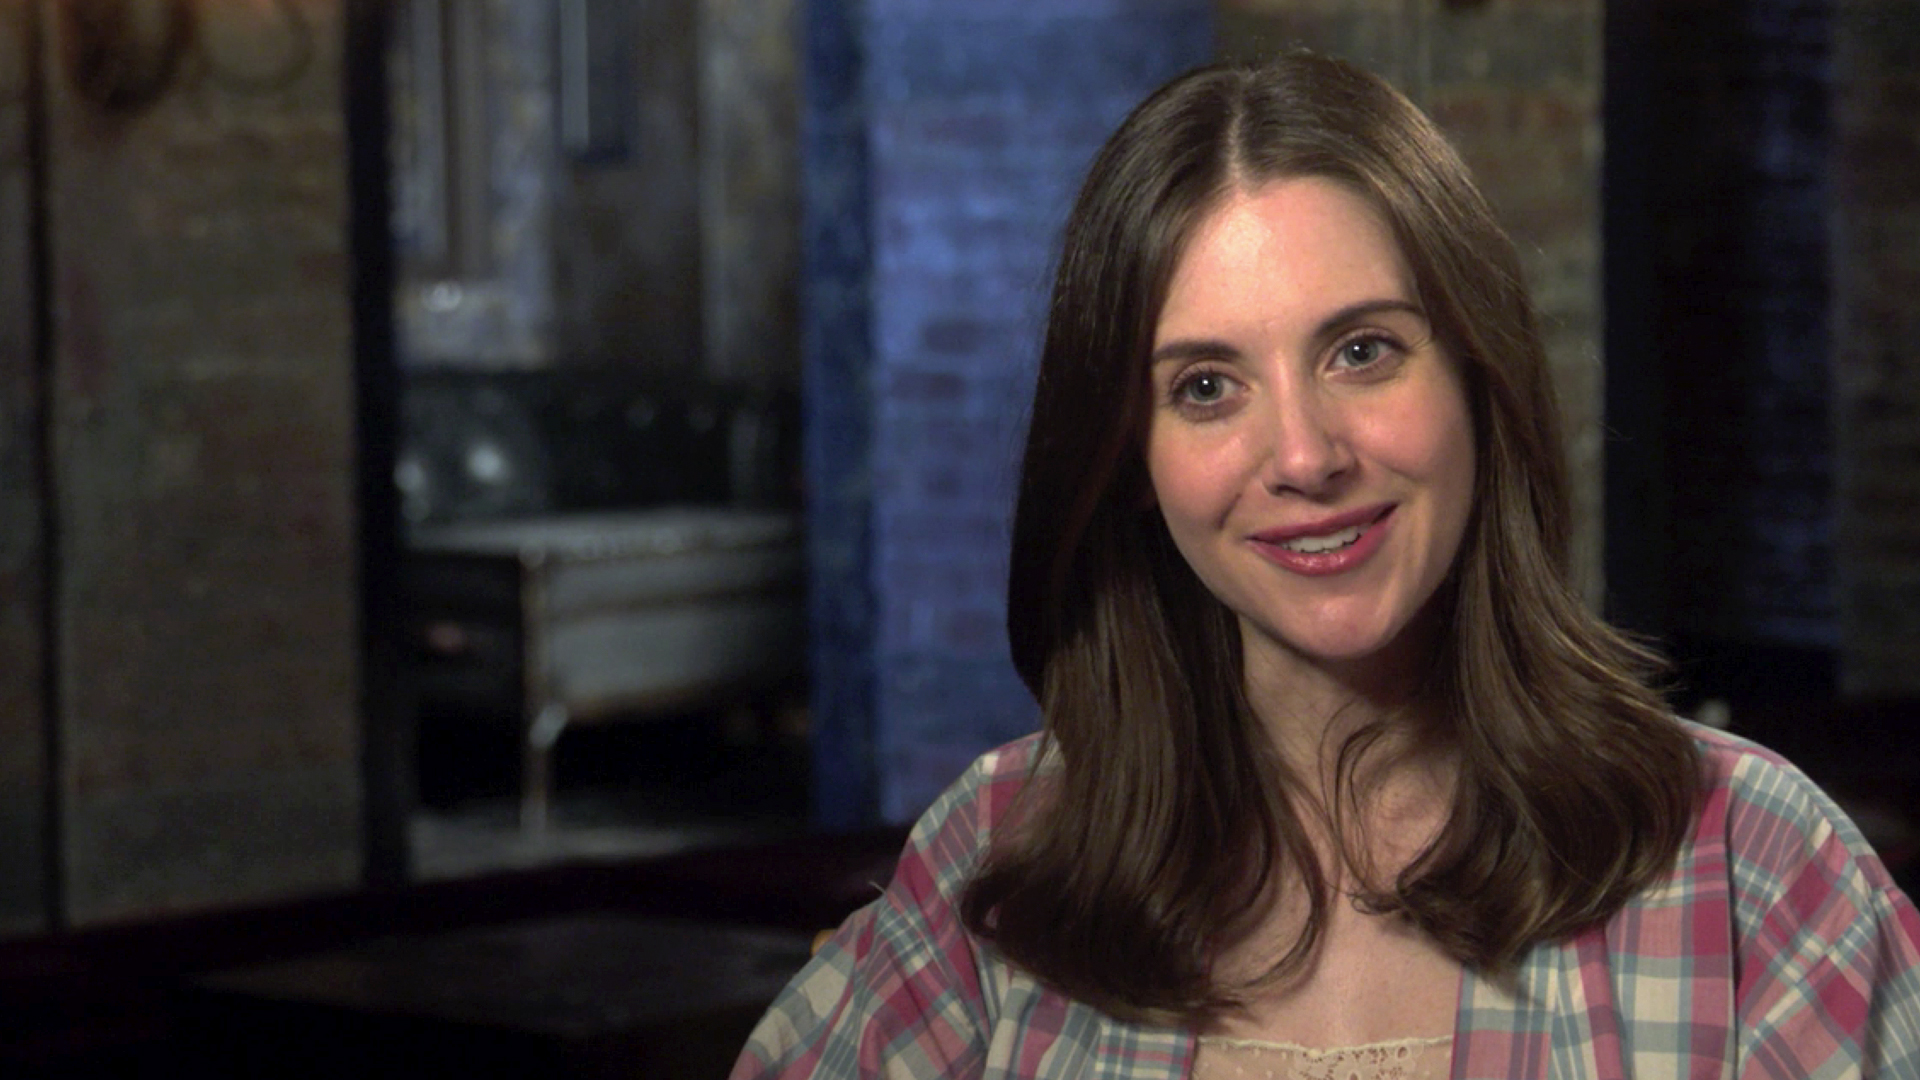 How to Be Single: How to Be Single Interview - Alison Brie 